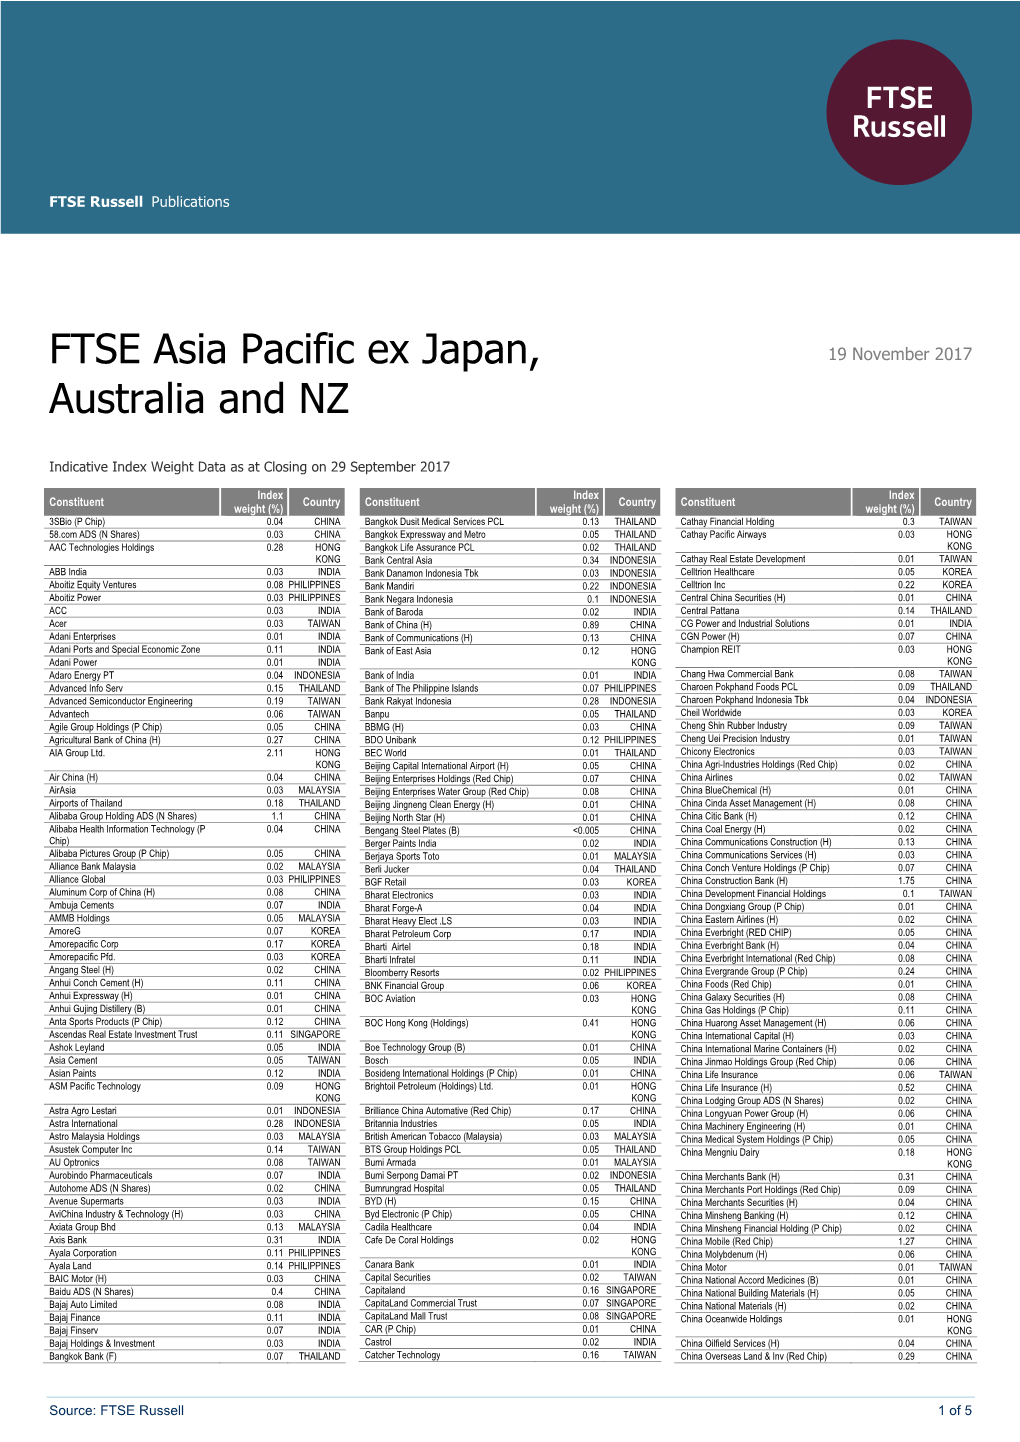 FTSE Asia Pacific Ex Japan, Australia and NZ